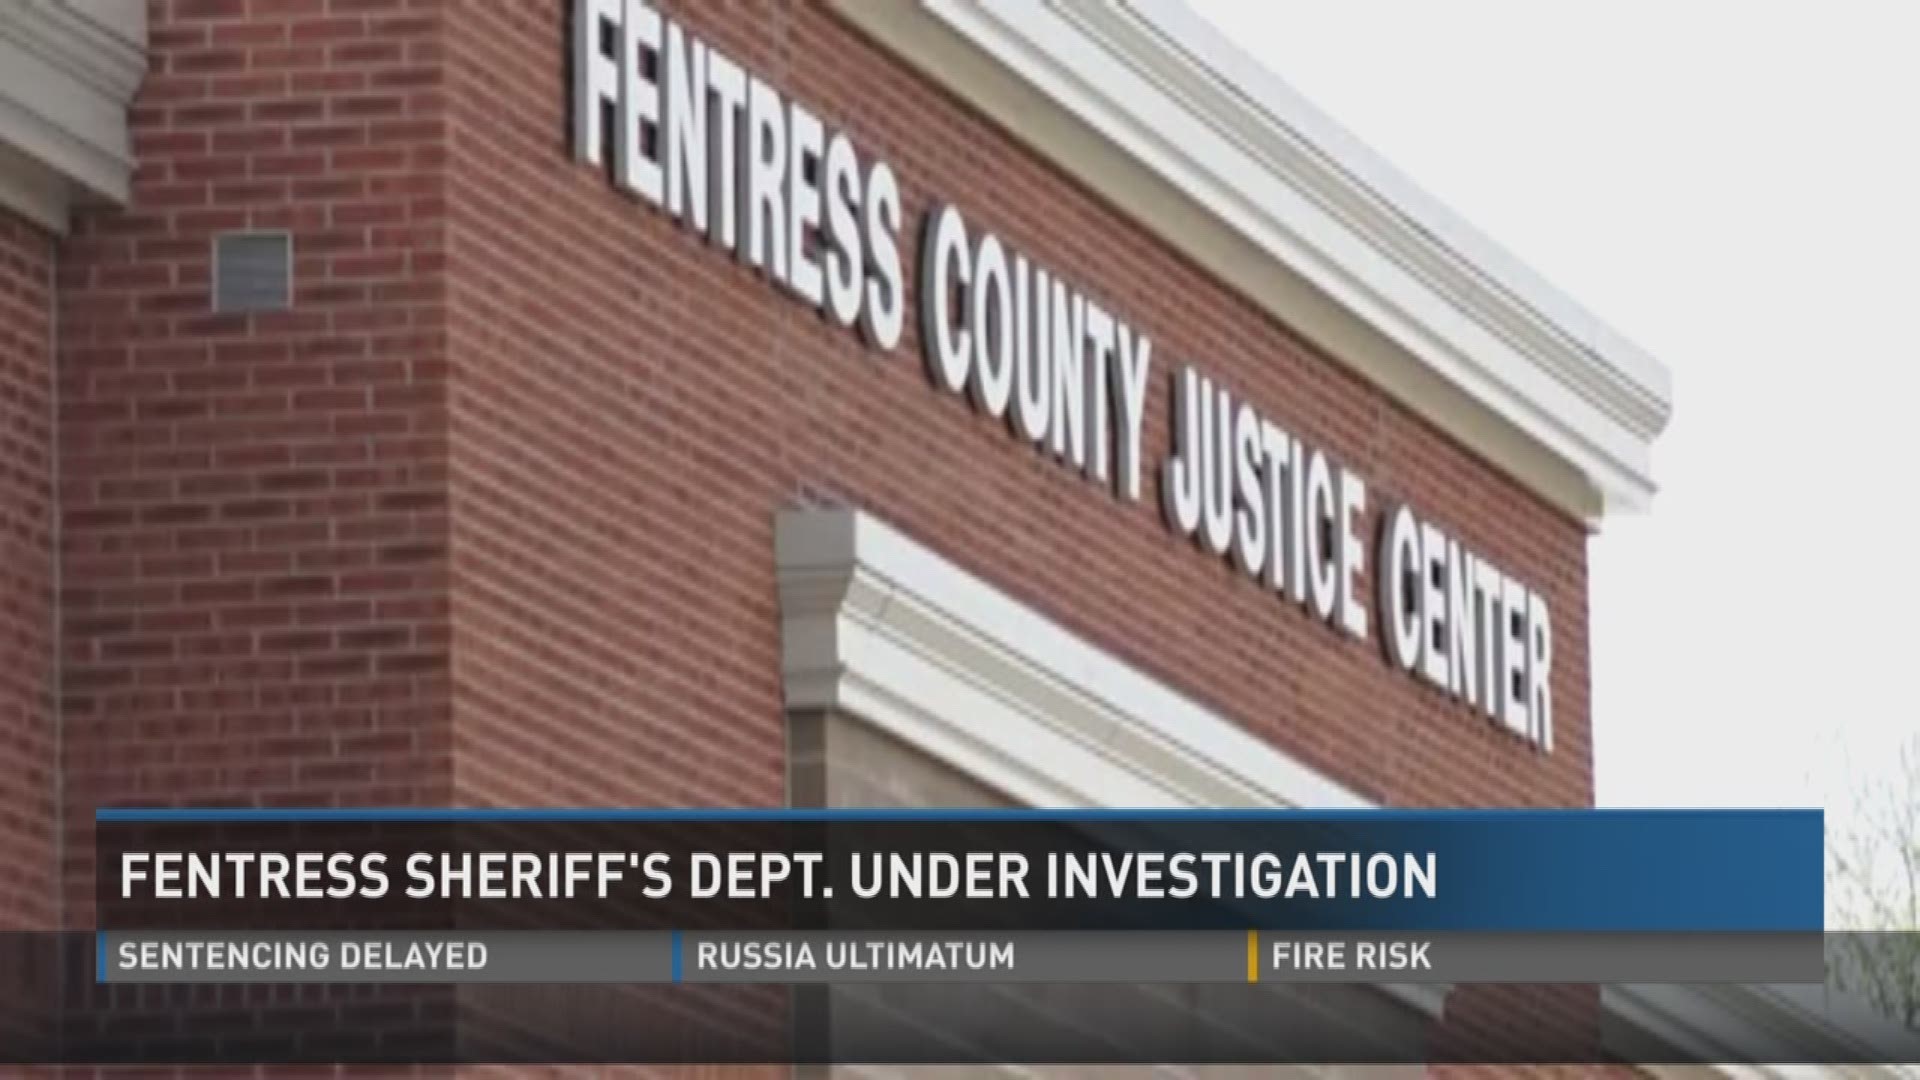 Assistant Special Agent in Charge of the FBI in Nashville Matthew Espenshade told 10News that they are looking into allegations of impropriety at the Fentress County Jail and Sheriff's Department.